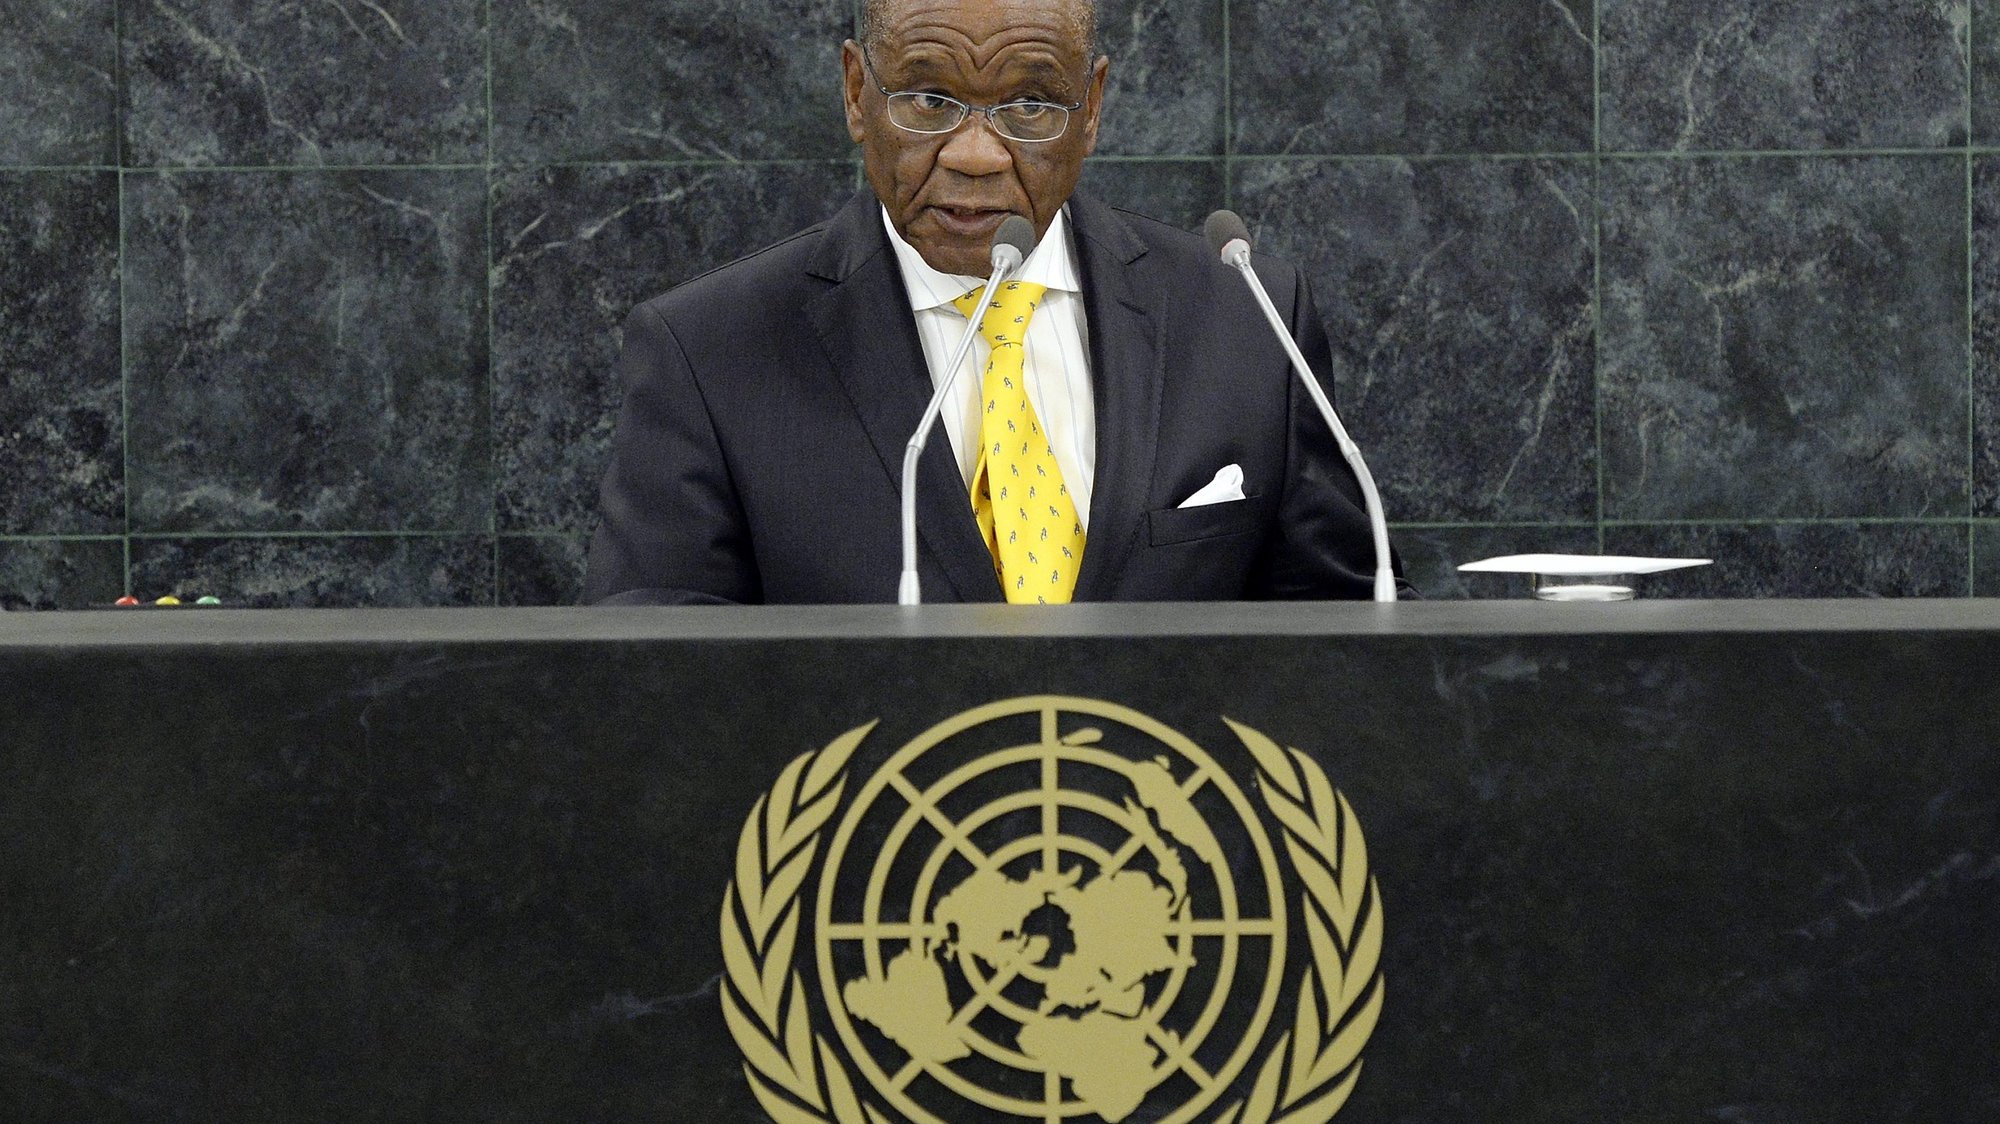 epa04376989 (FILE) A file picture dated 26 September 2013 shows Thomas Motsoahae Thabane, Prime Minister of Lesotho, speaking during the general debate of the 68th session of the United Nations General Assembly at United Nations headquarters in New York, New York, USA. Lesotho&#039;s Prime Minister Thomas Thabane said 30 August 2014 he had fled to South Africa after the army surrounded key buildings, alleging a coup attempt. But the military denied seizing power, with spokesman Ntele Ntoi telling South African television that the army&#039;s sole aim was to disarm police who were preparing to supply weapons to some political parties.  EPA/STAN HONDA/POOL